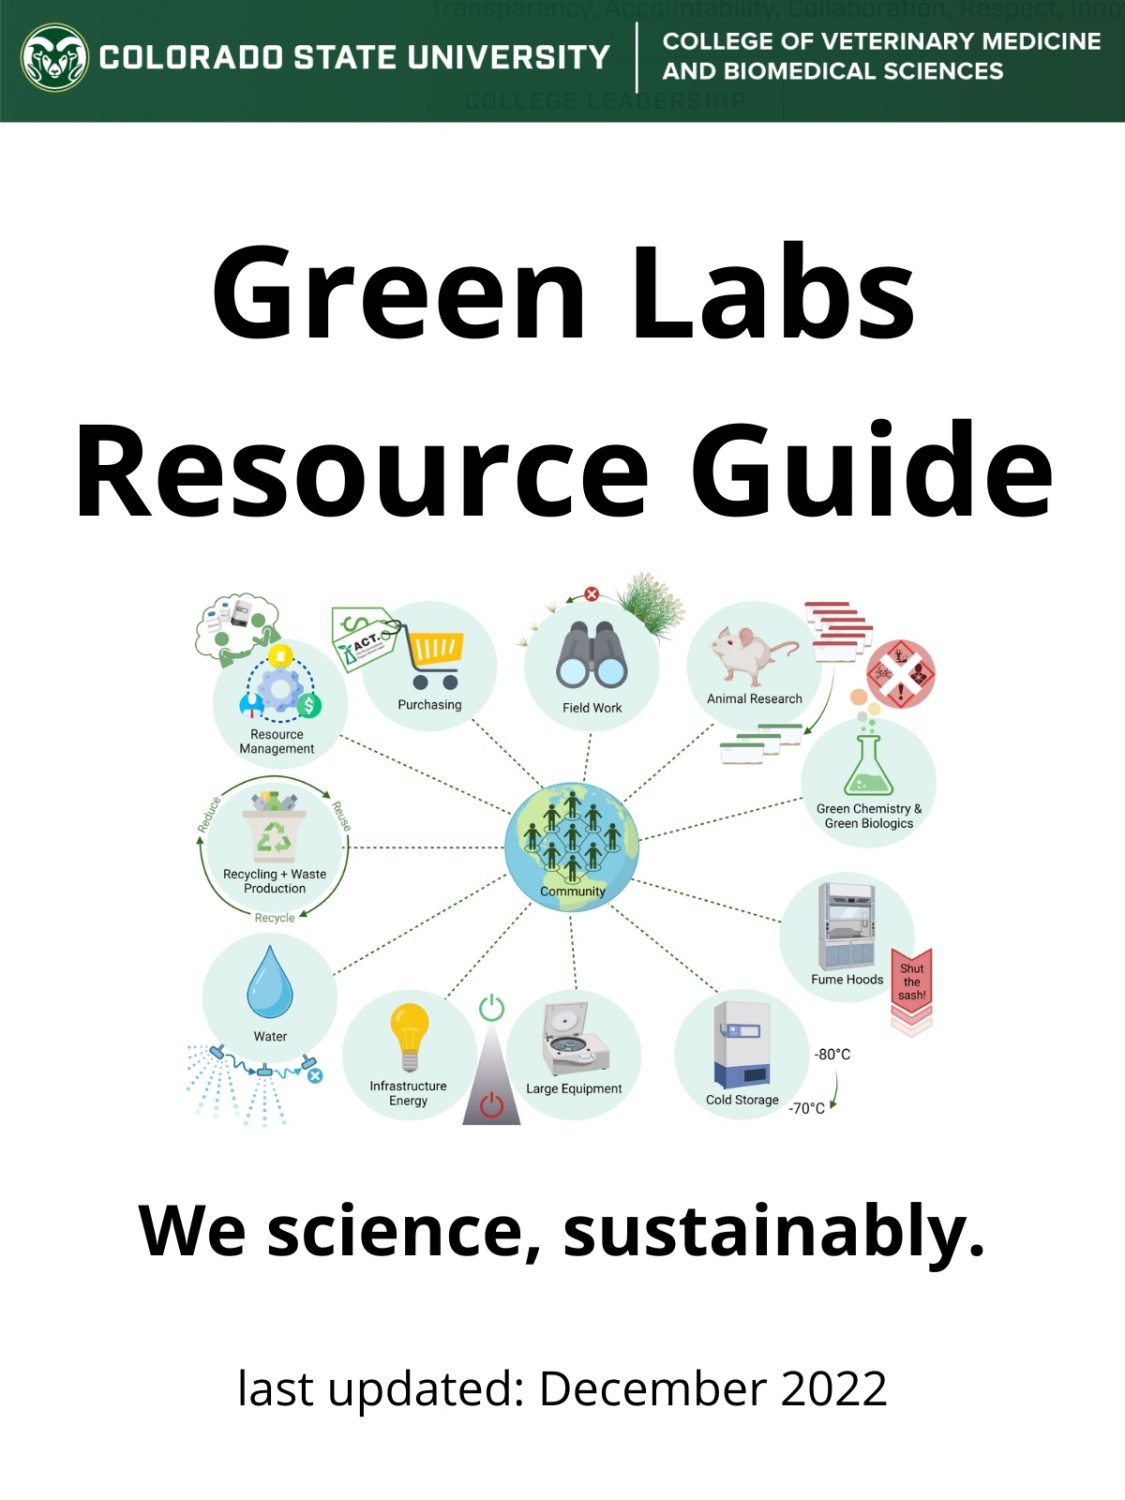 Cover image for CVMBS Green Labs Resource Guide